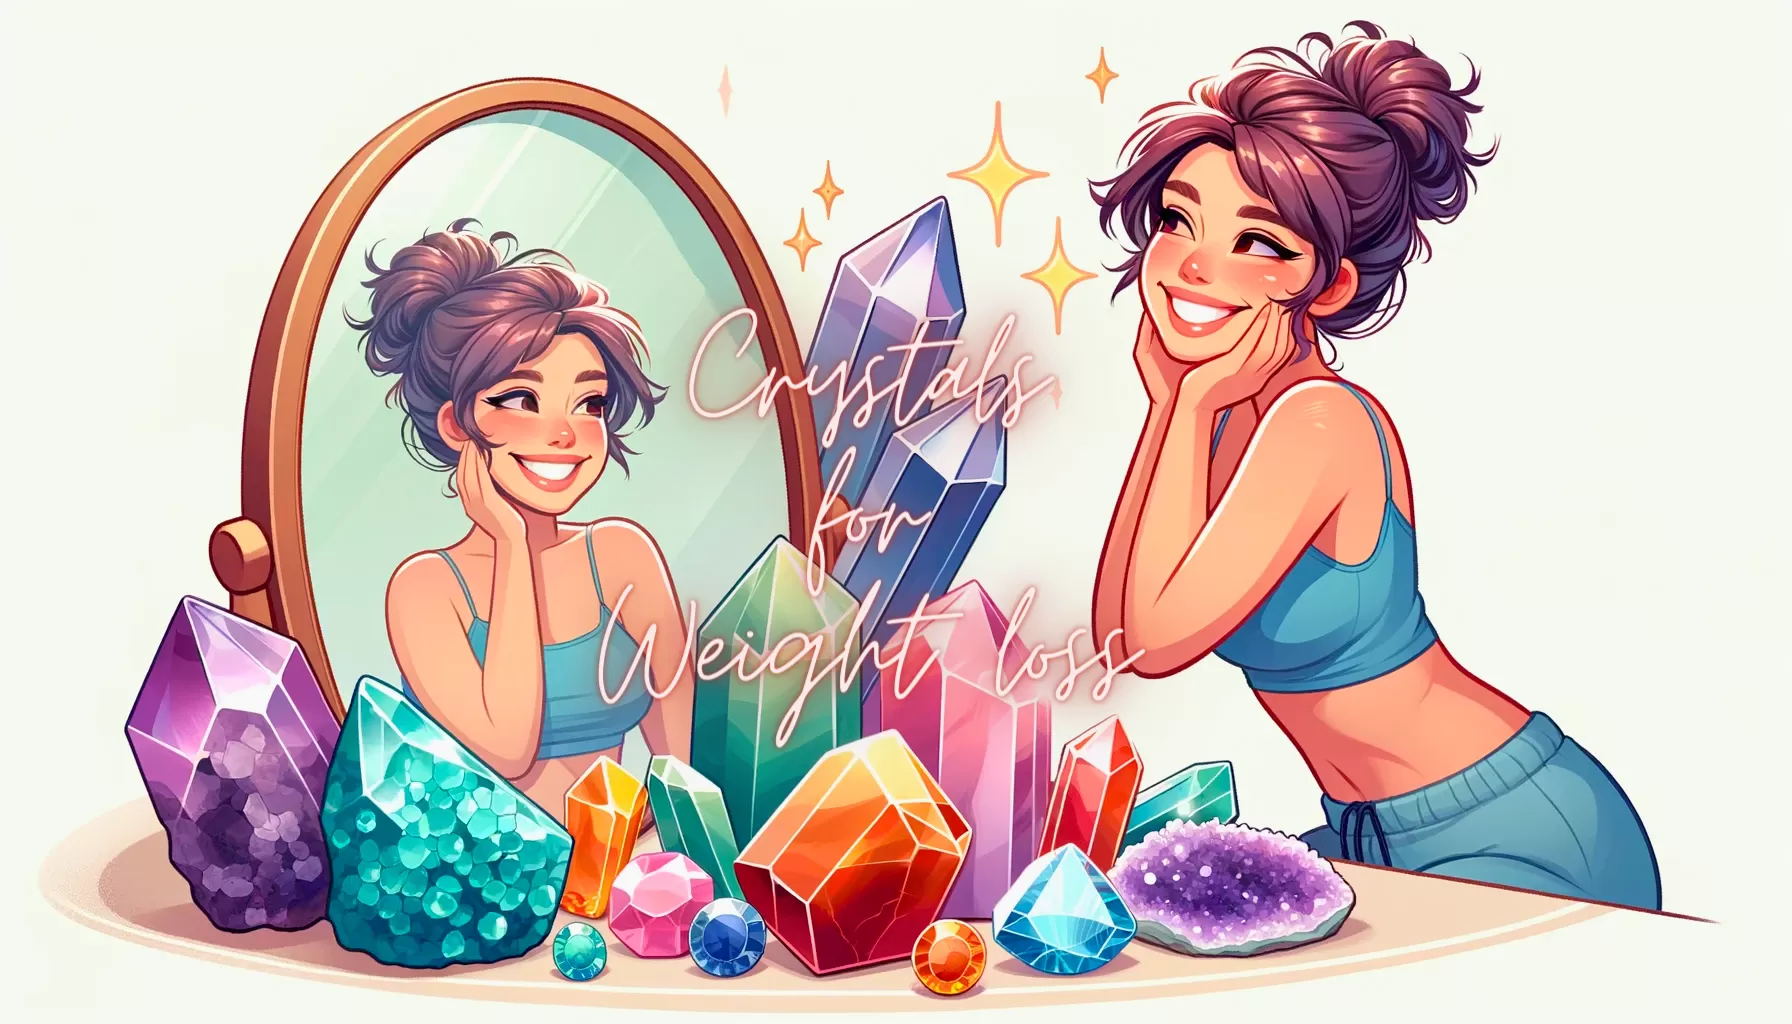 Animated image of a happy woman looking in a mirror with crystals for weight loss, symbolizing confidence and positive body image